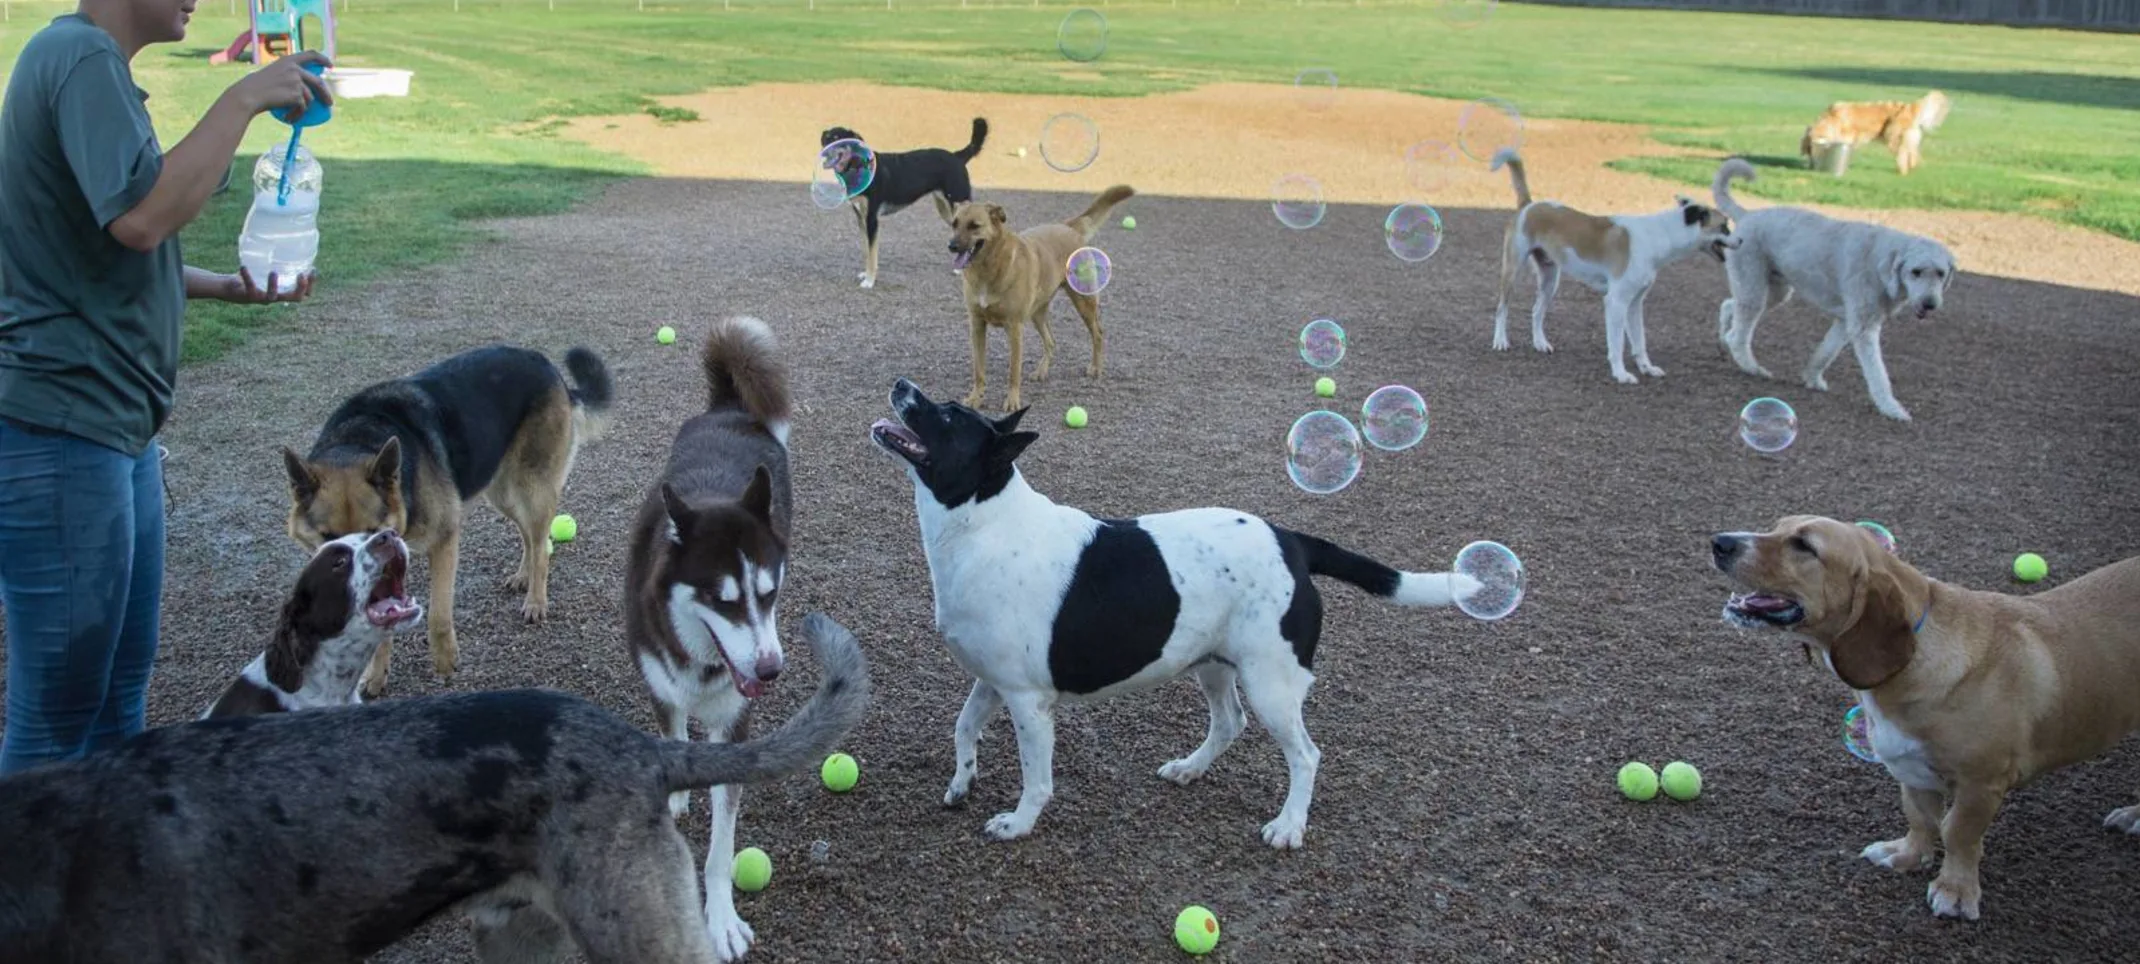 Dogs catching bubbles at Rover Oaks Pet Resort